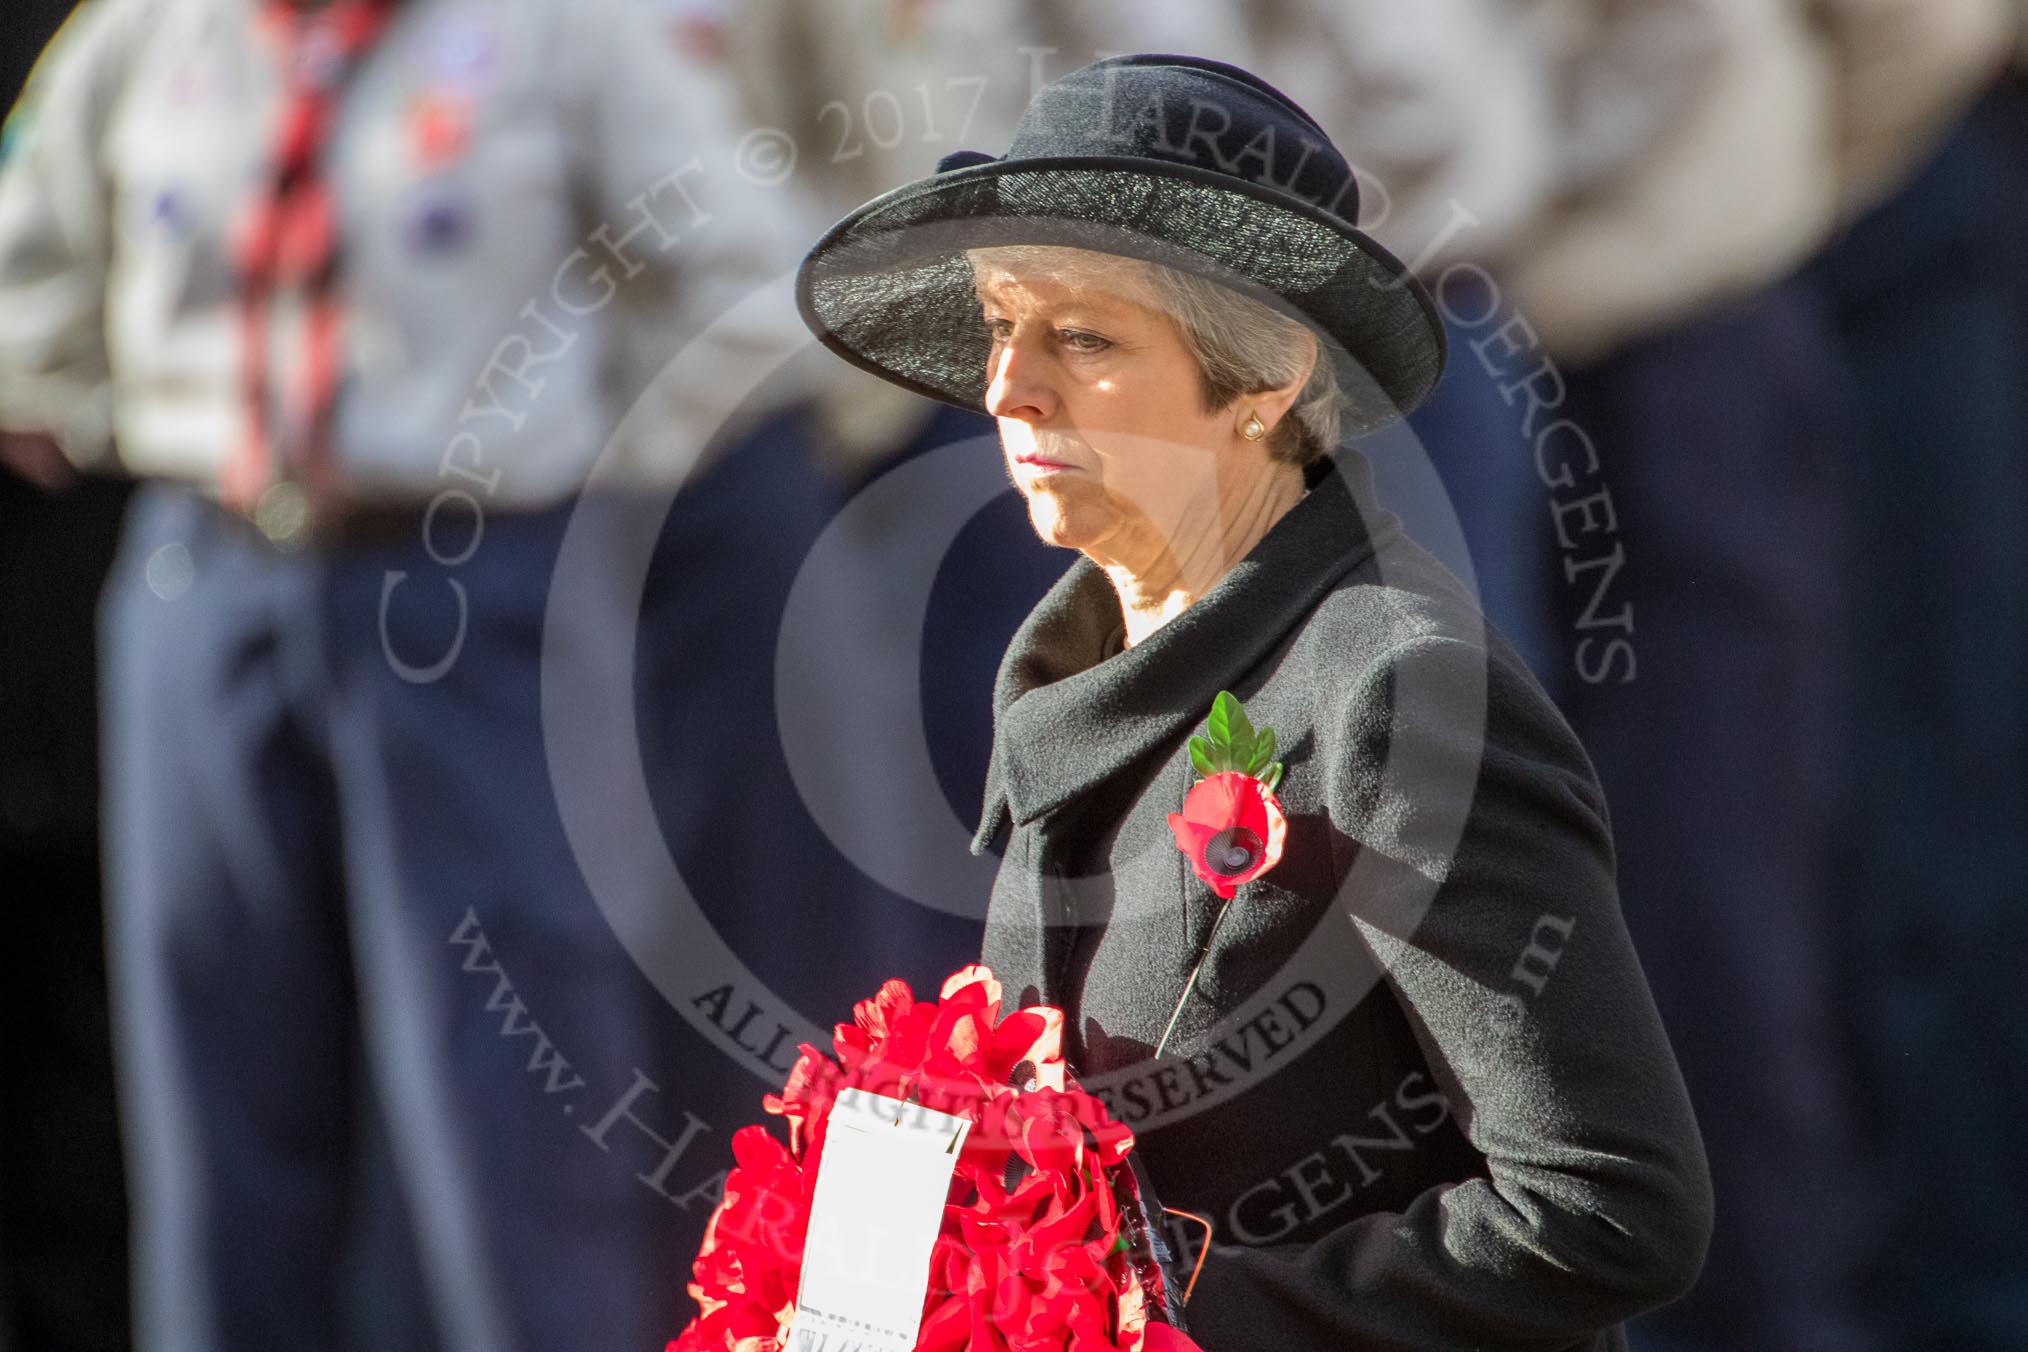 The Rt Hon Theresa May MP, Prime Minister, with her wreath on behalf of the Government during the Remembrance Sunday Cenotaph Ceremony 2018 at Horse Guards Parade, Westminster, London, 11 November 2018, 11:07.